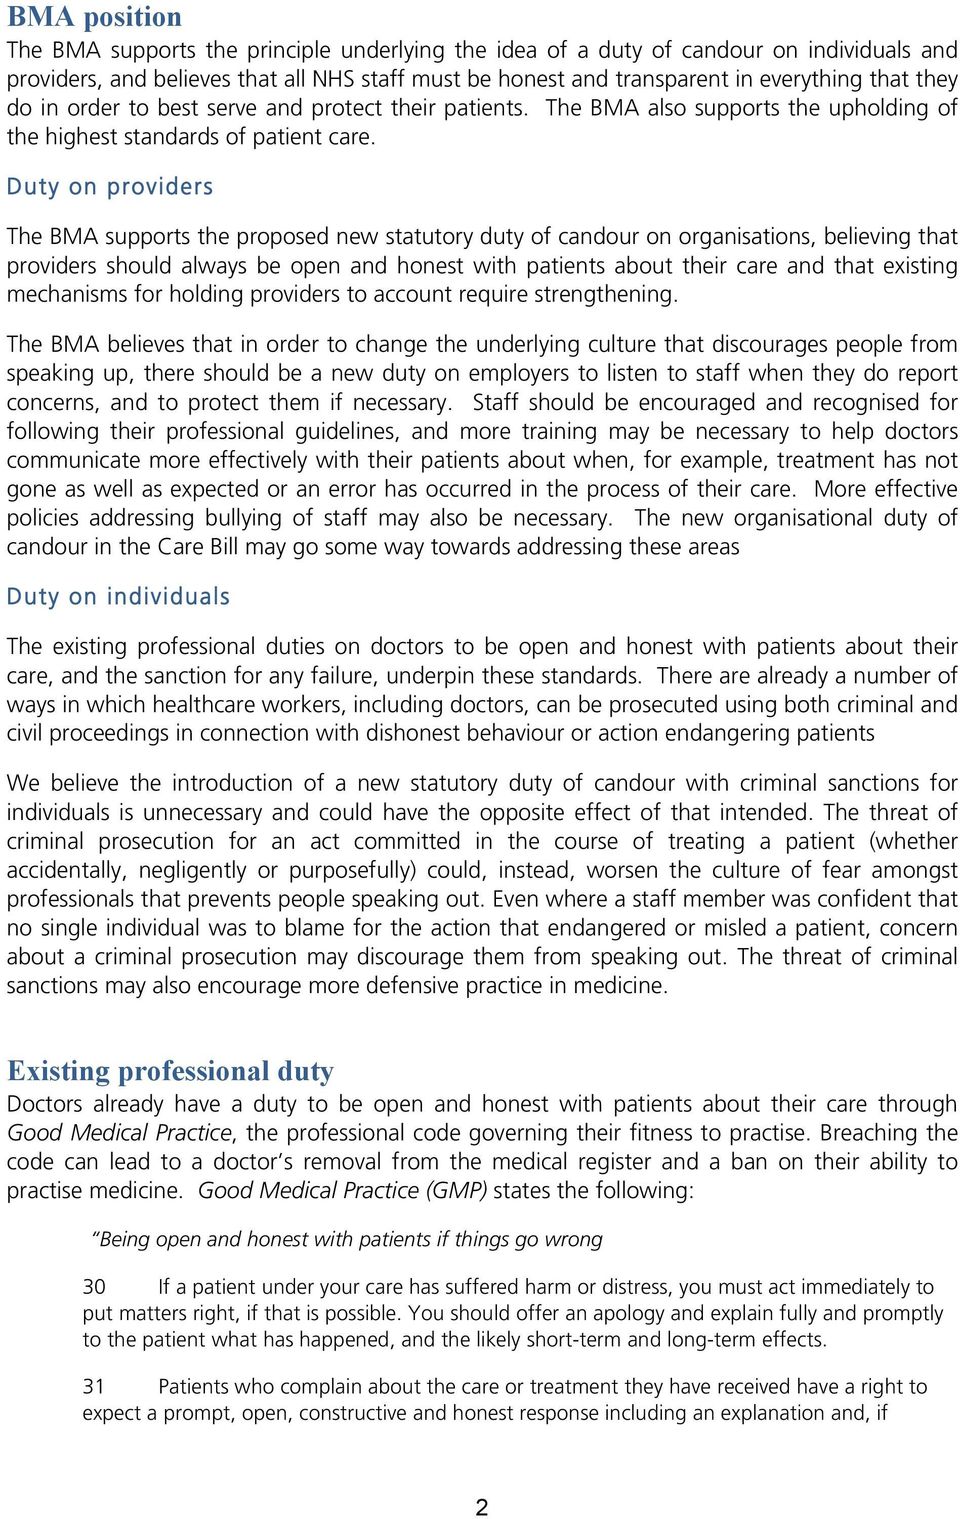 Duty on providers The BMA supports the proposed new statutory duty of candour on organisations, believing that providers should always be open and honest with patients about their care and that